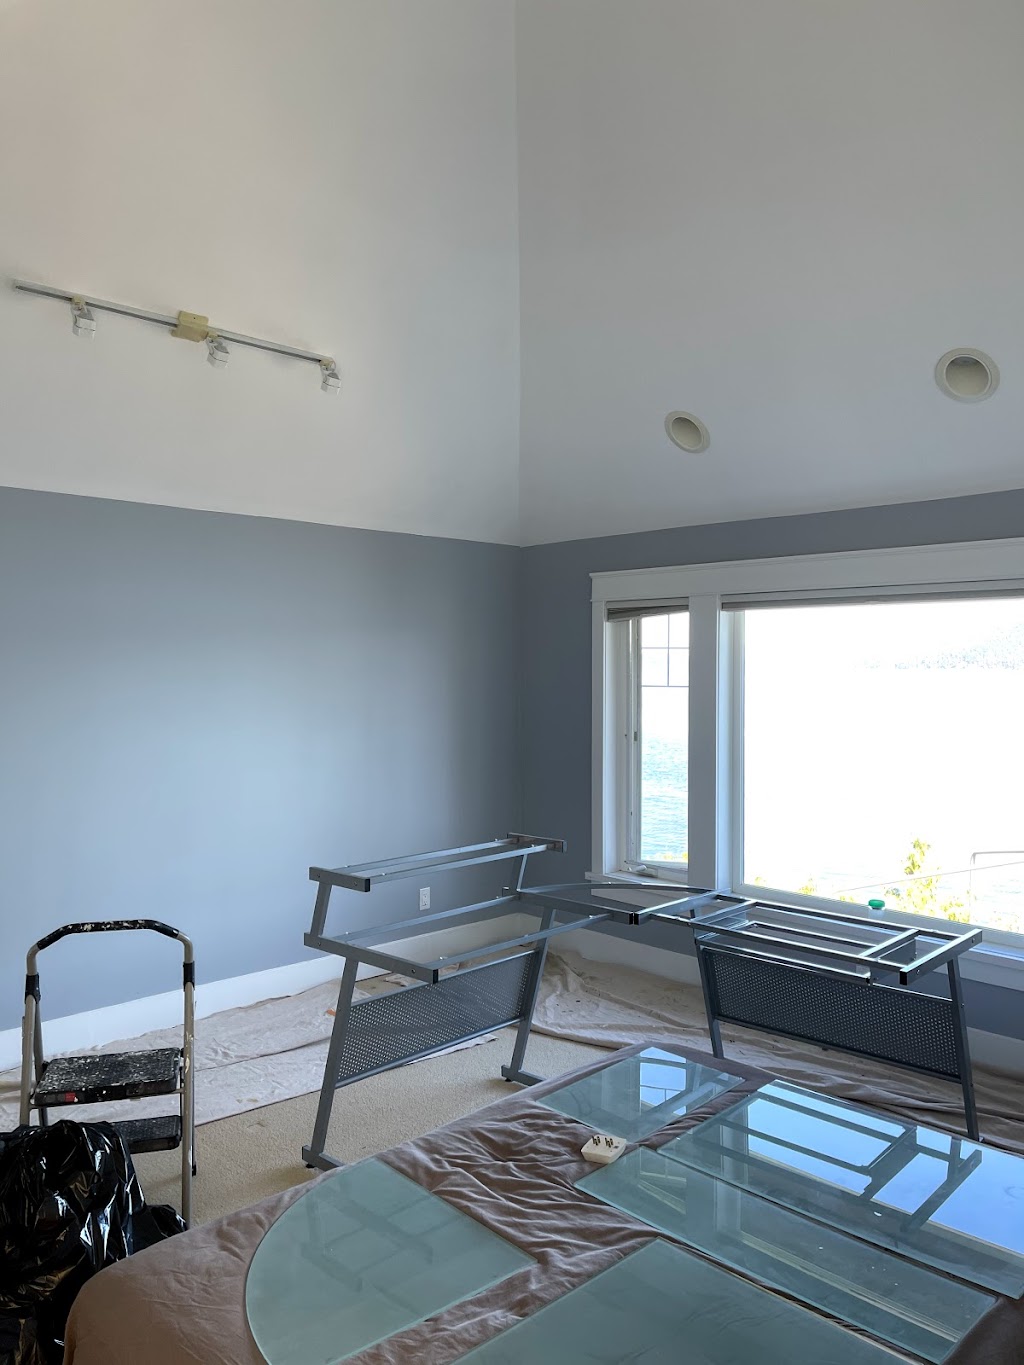 Finest Finish Painting & Drywall | painter | 3351 University Woods, Victoria, BC V8P 5R2, Canada | 2506869483 OR +1 250-686-9483